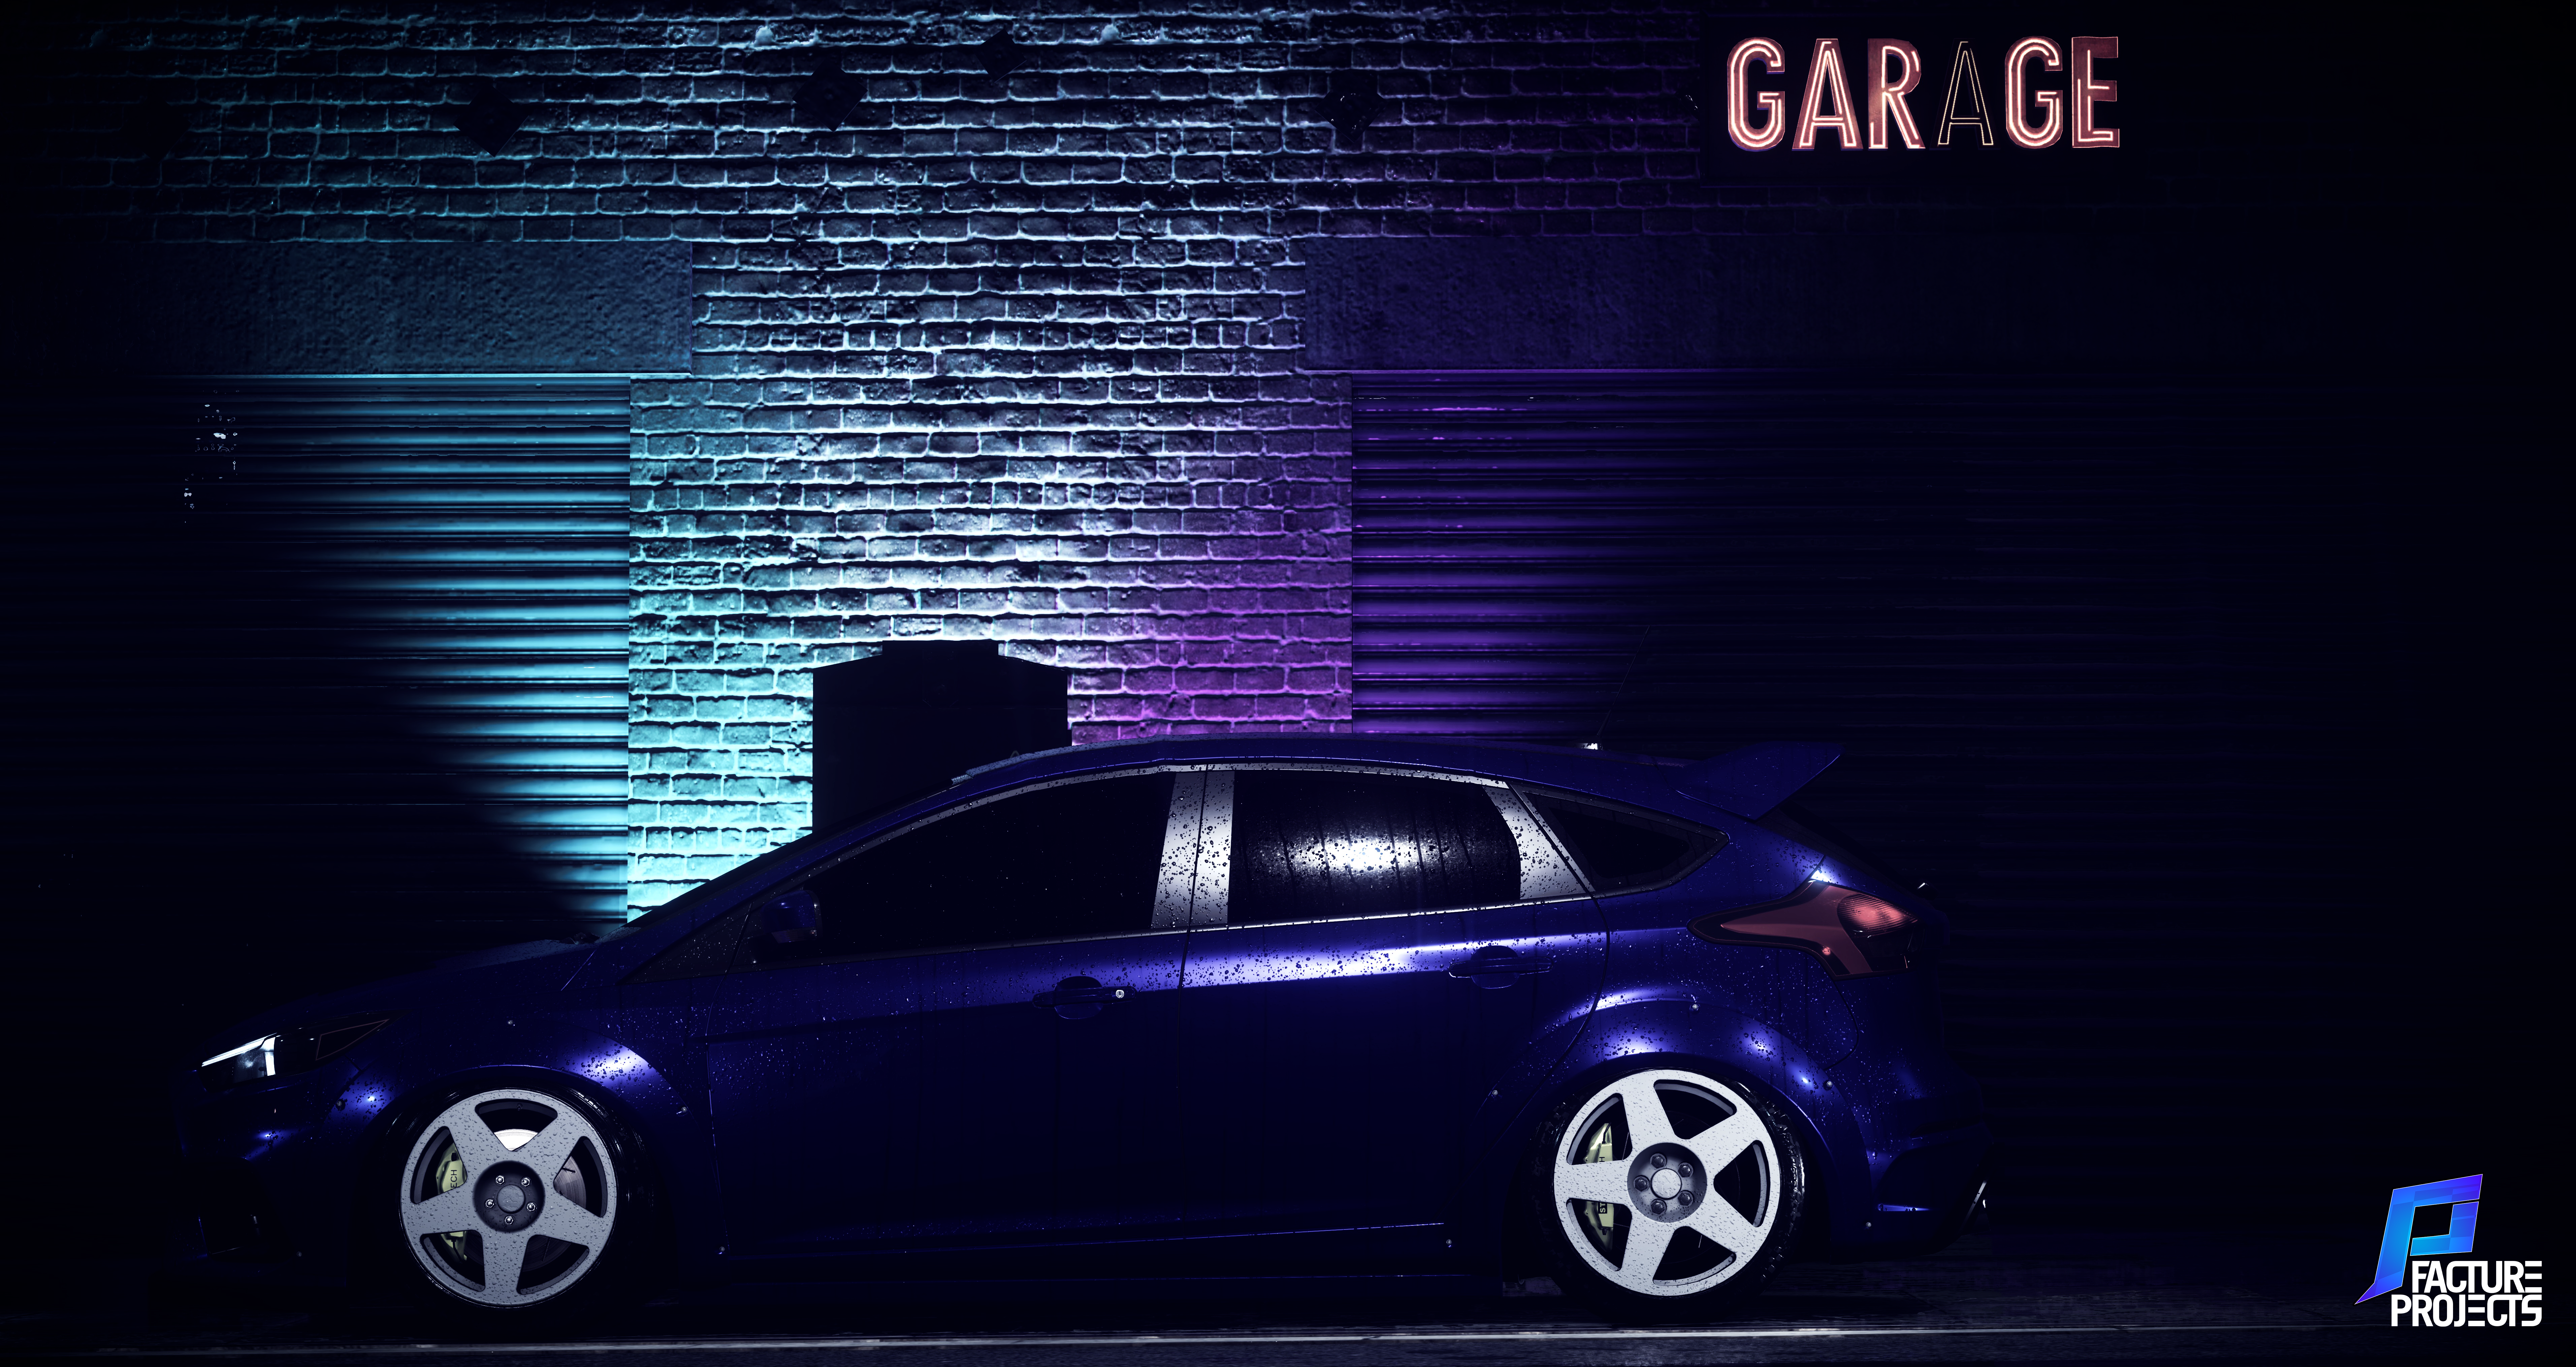 Ford Ford Focus RS Blue Fifteen52 NFS 2015 Need For Speed Garage 7648x4060